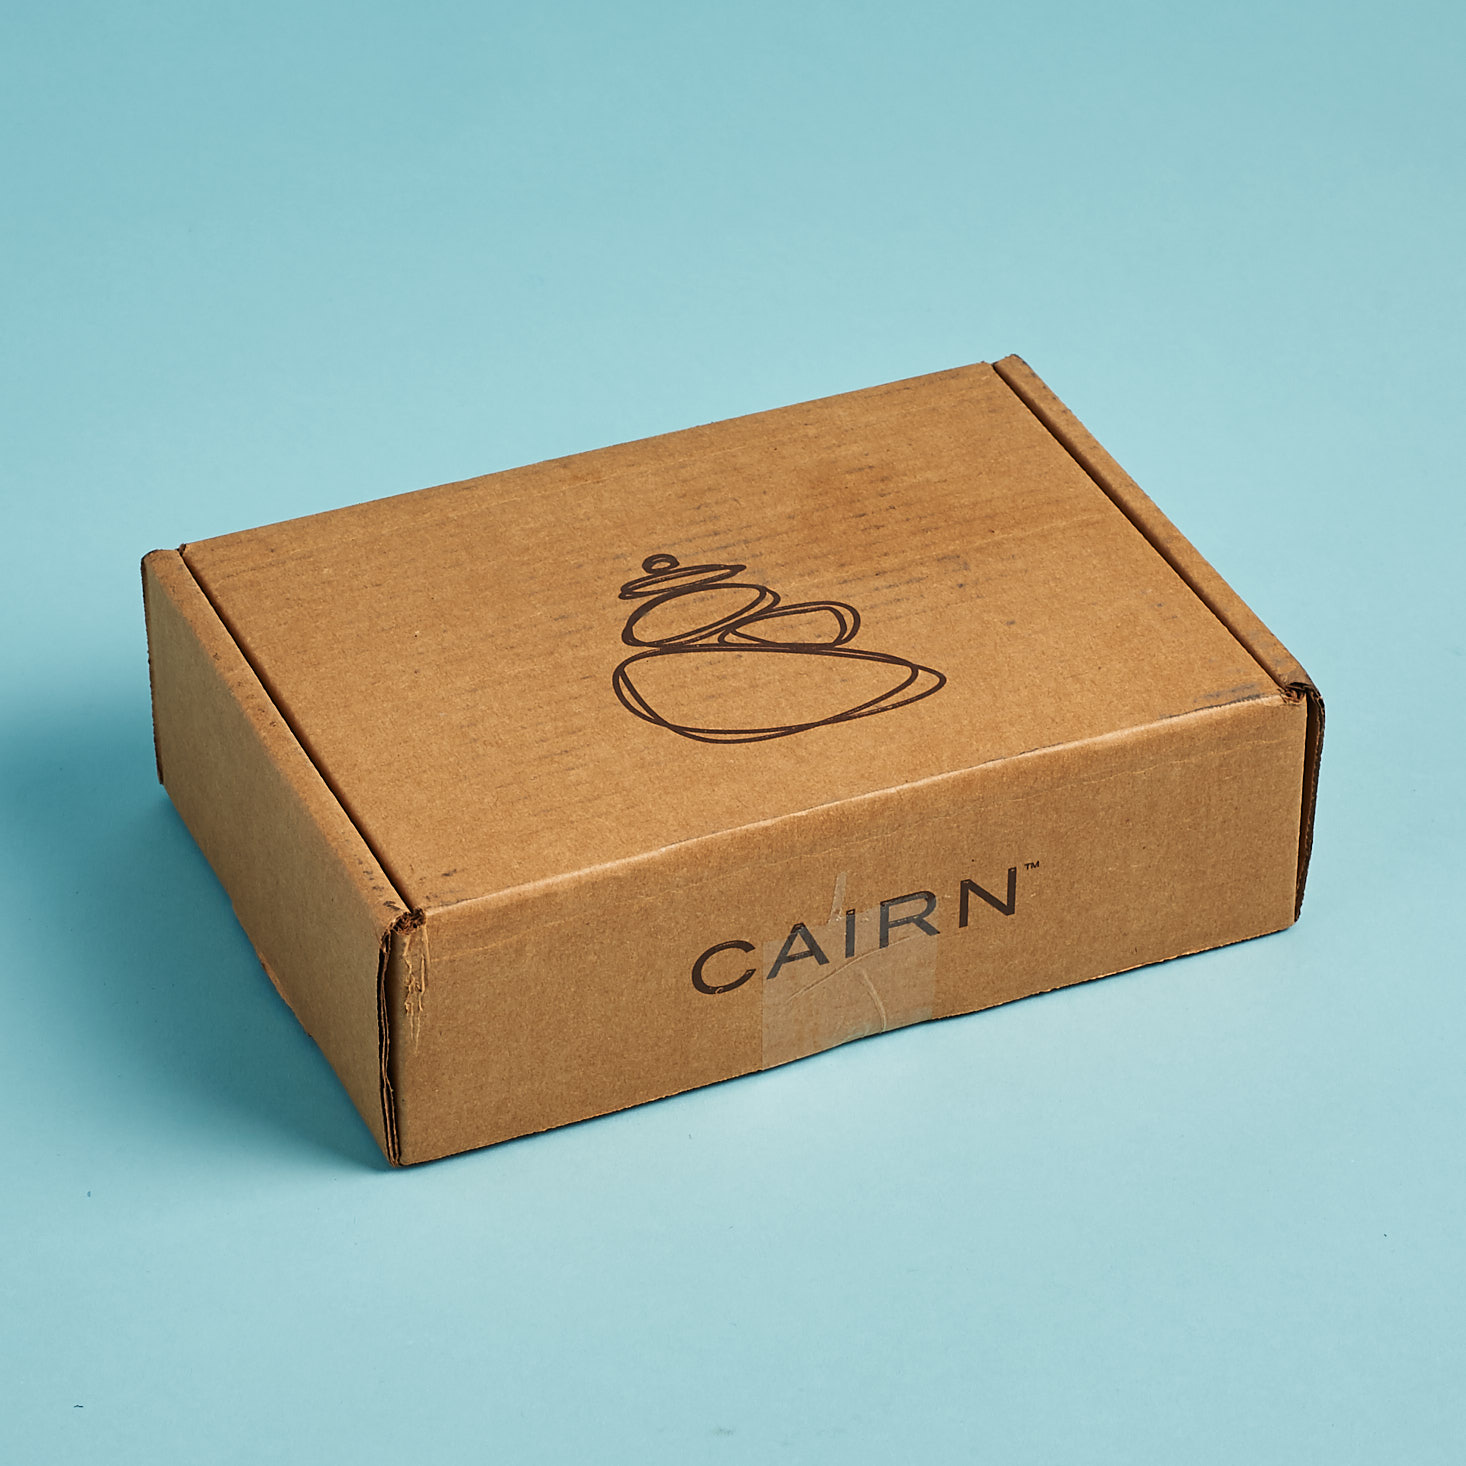 Cairn Outdoor Subscription Review + Coupon – June 2018